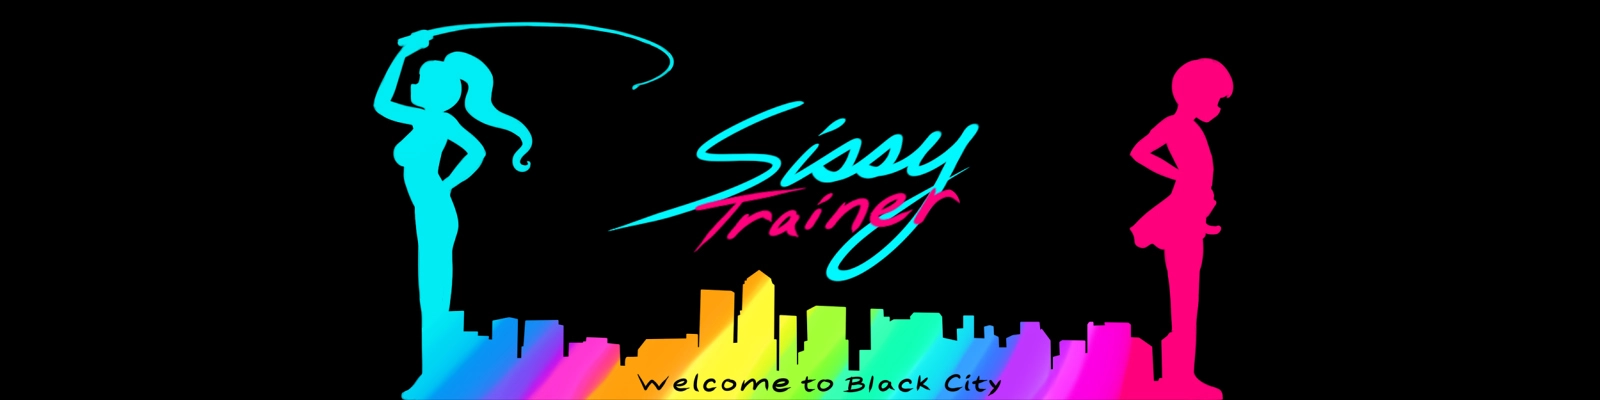 Sissy Trainer: Welcome to Black City main image